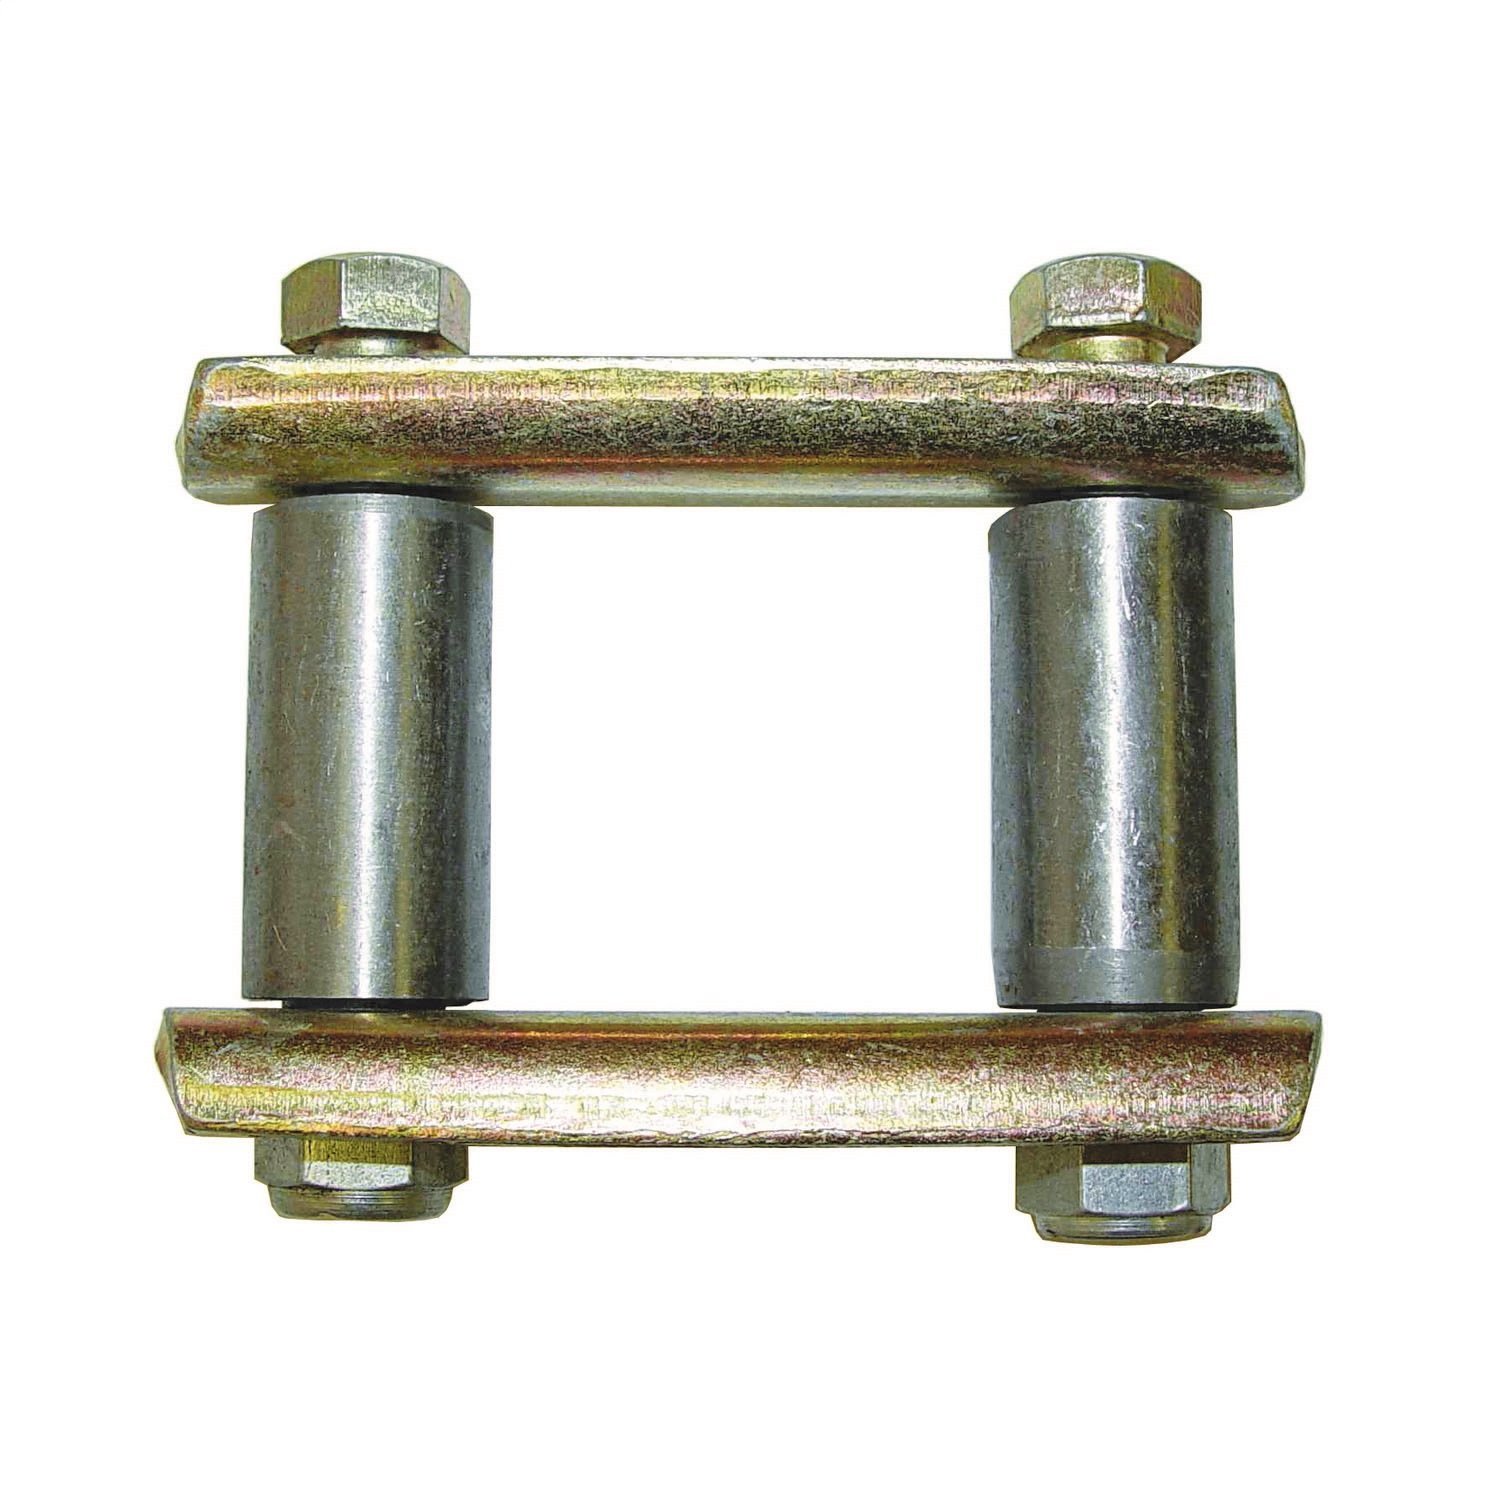 Replacement leaf spring shackle kit from Omix-ADA, Fits 55-75 Jeep CJ5 and CJ6 It includes one complete shackle assembly.